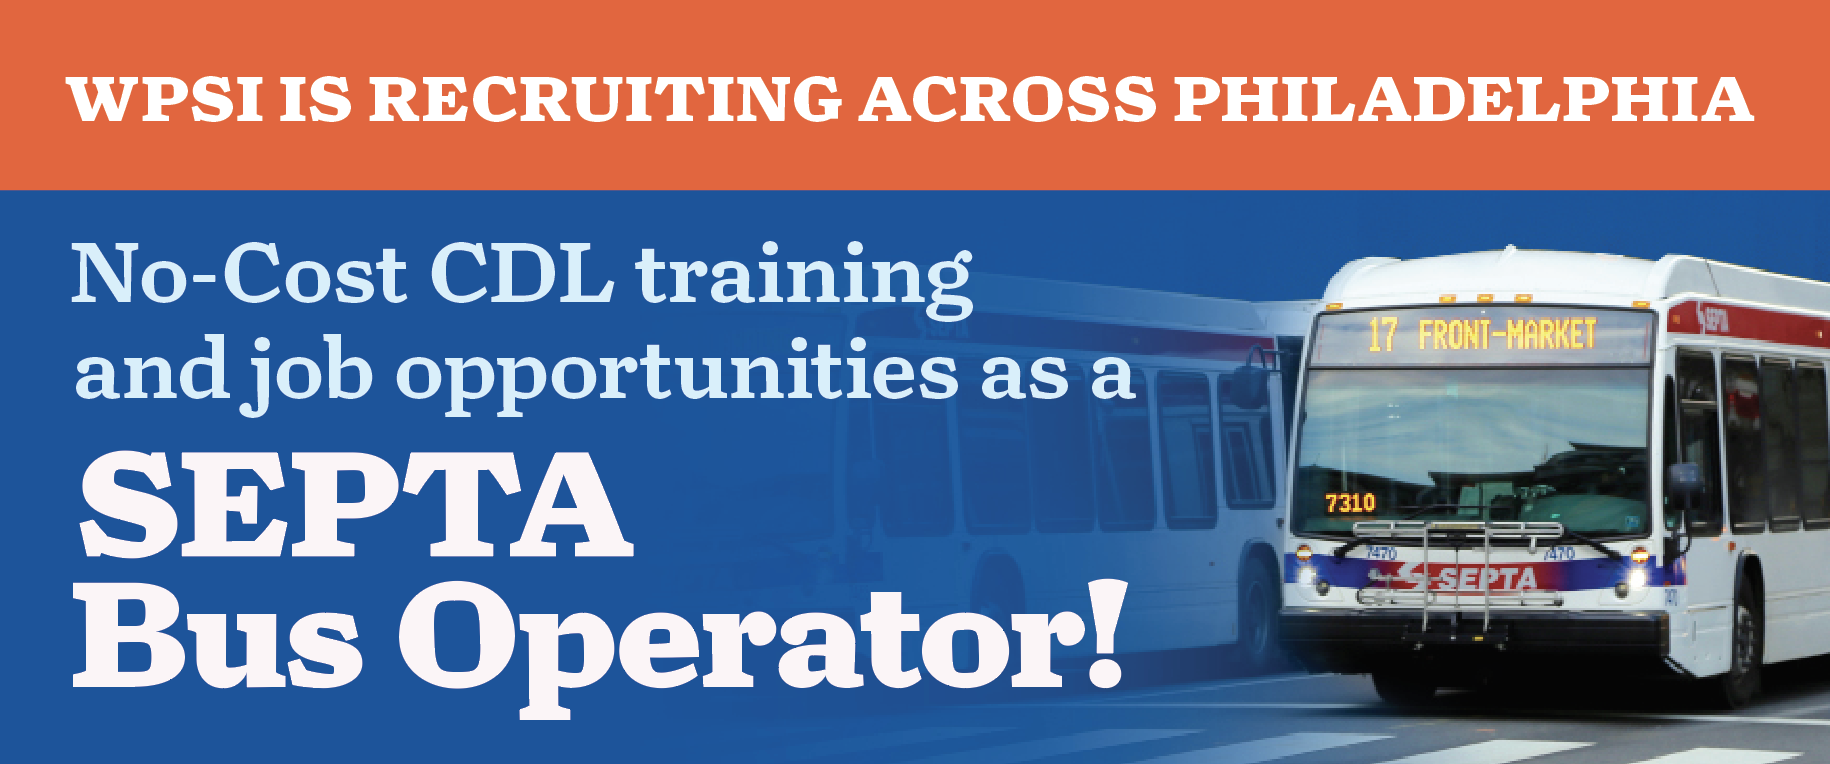 WPSI is recruiting across Philadelphia for No-Cost CDL training and job opportunities as a SEPTA Bus Operator!